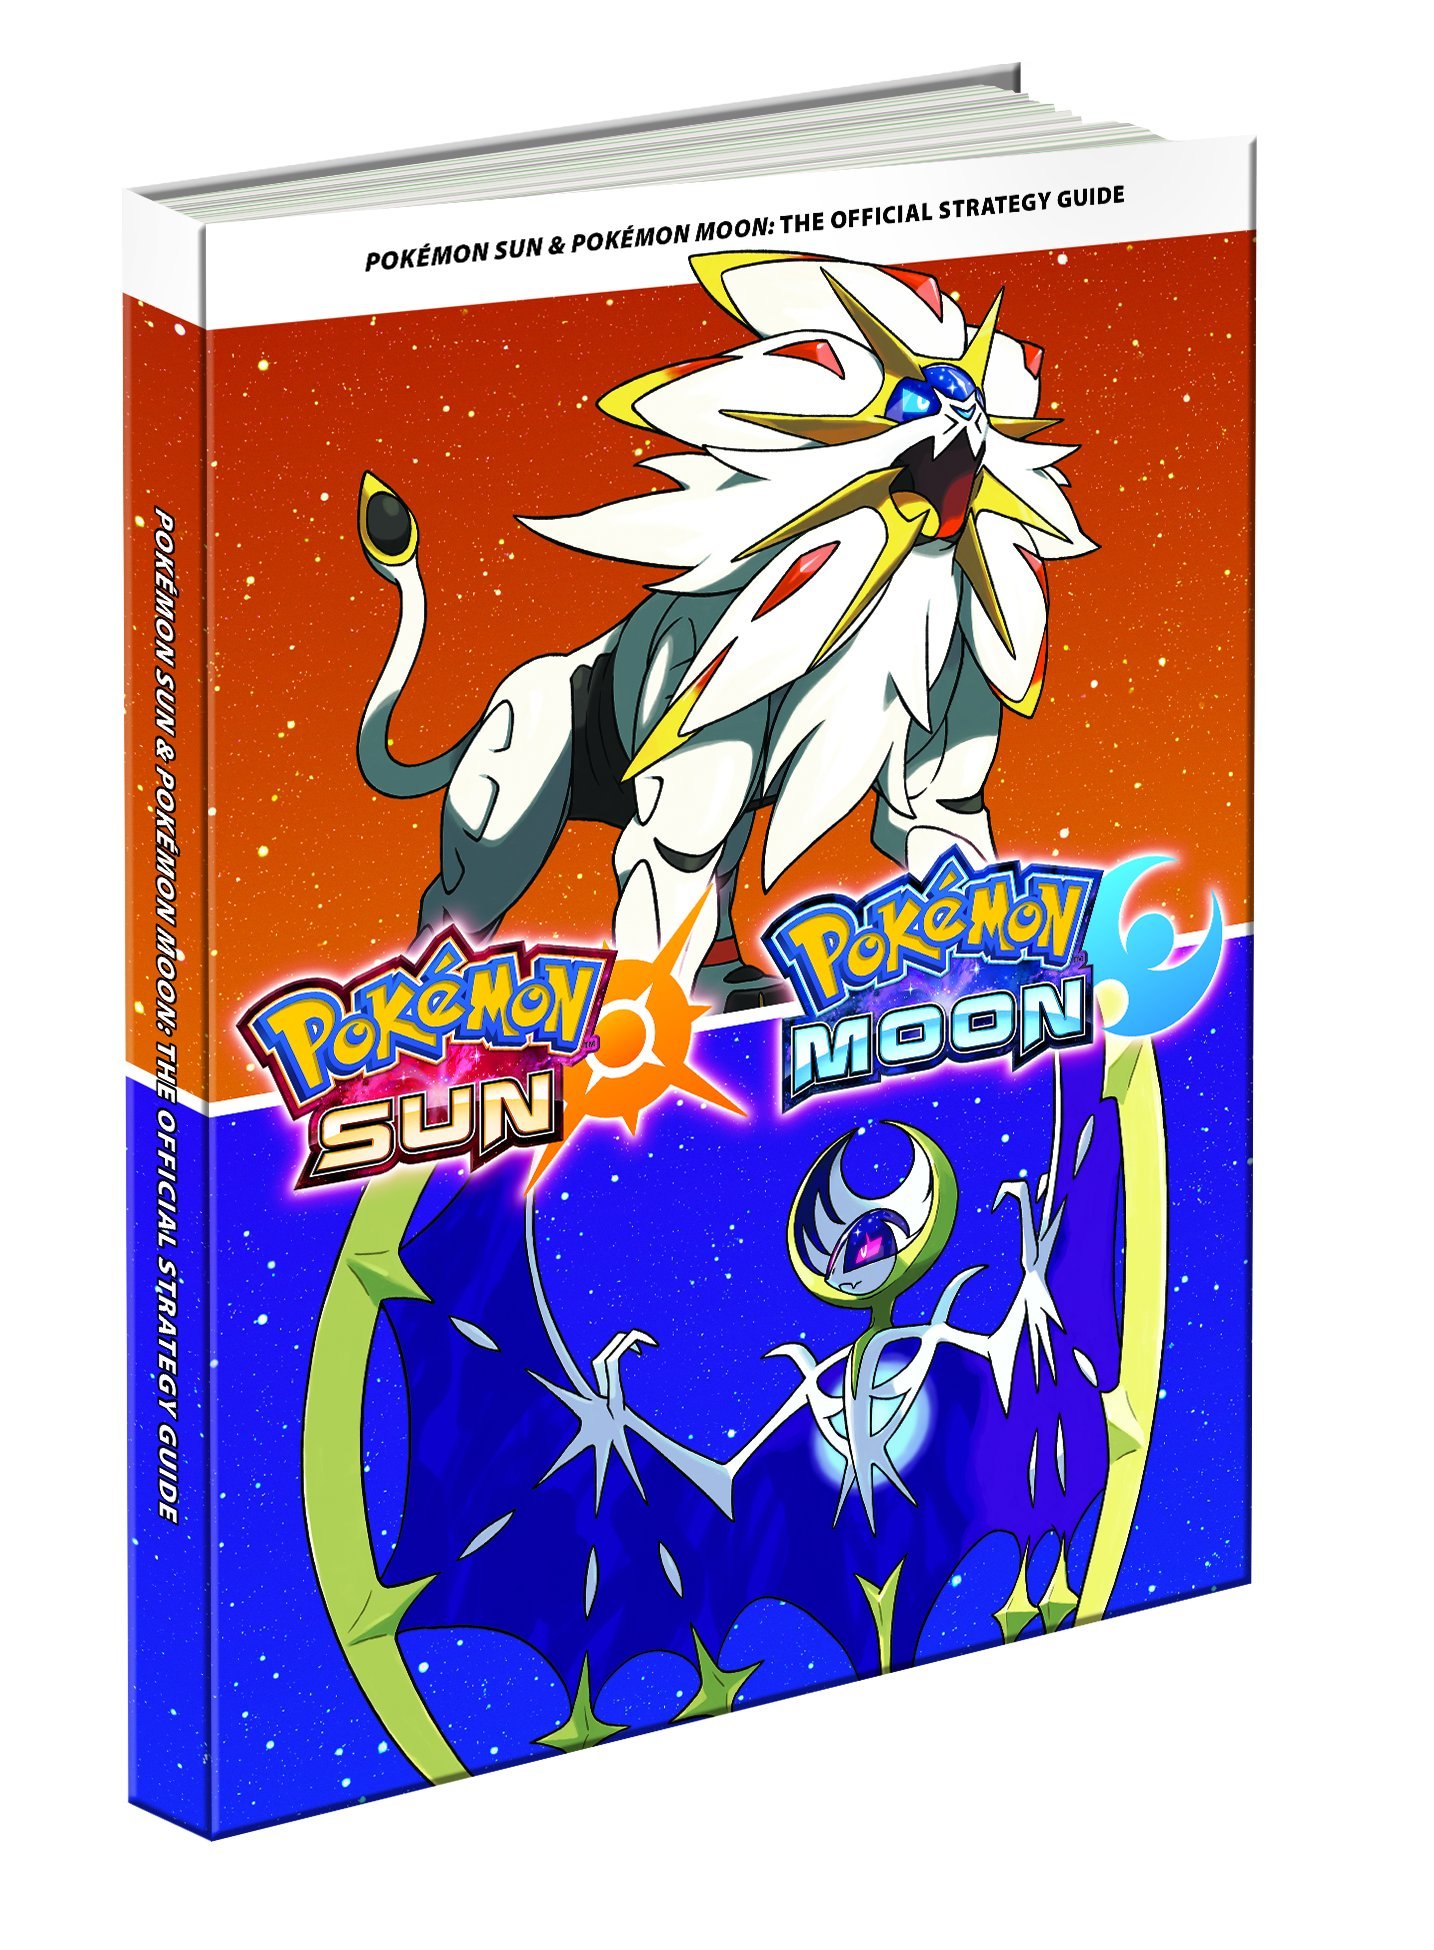 Pokemon Sun/Moon guide in the works, including collector's edition